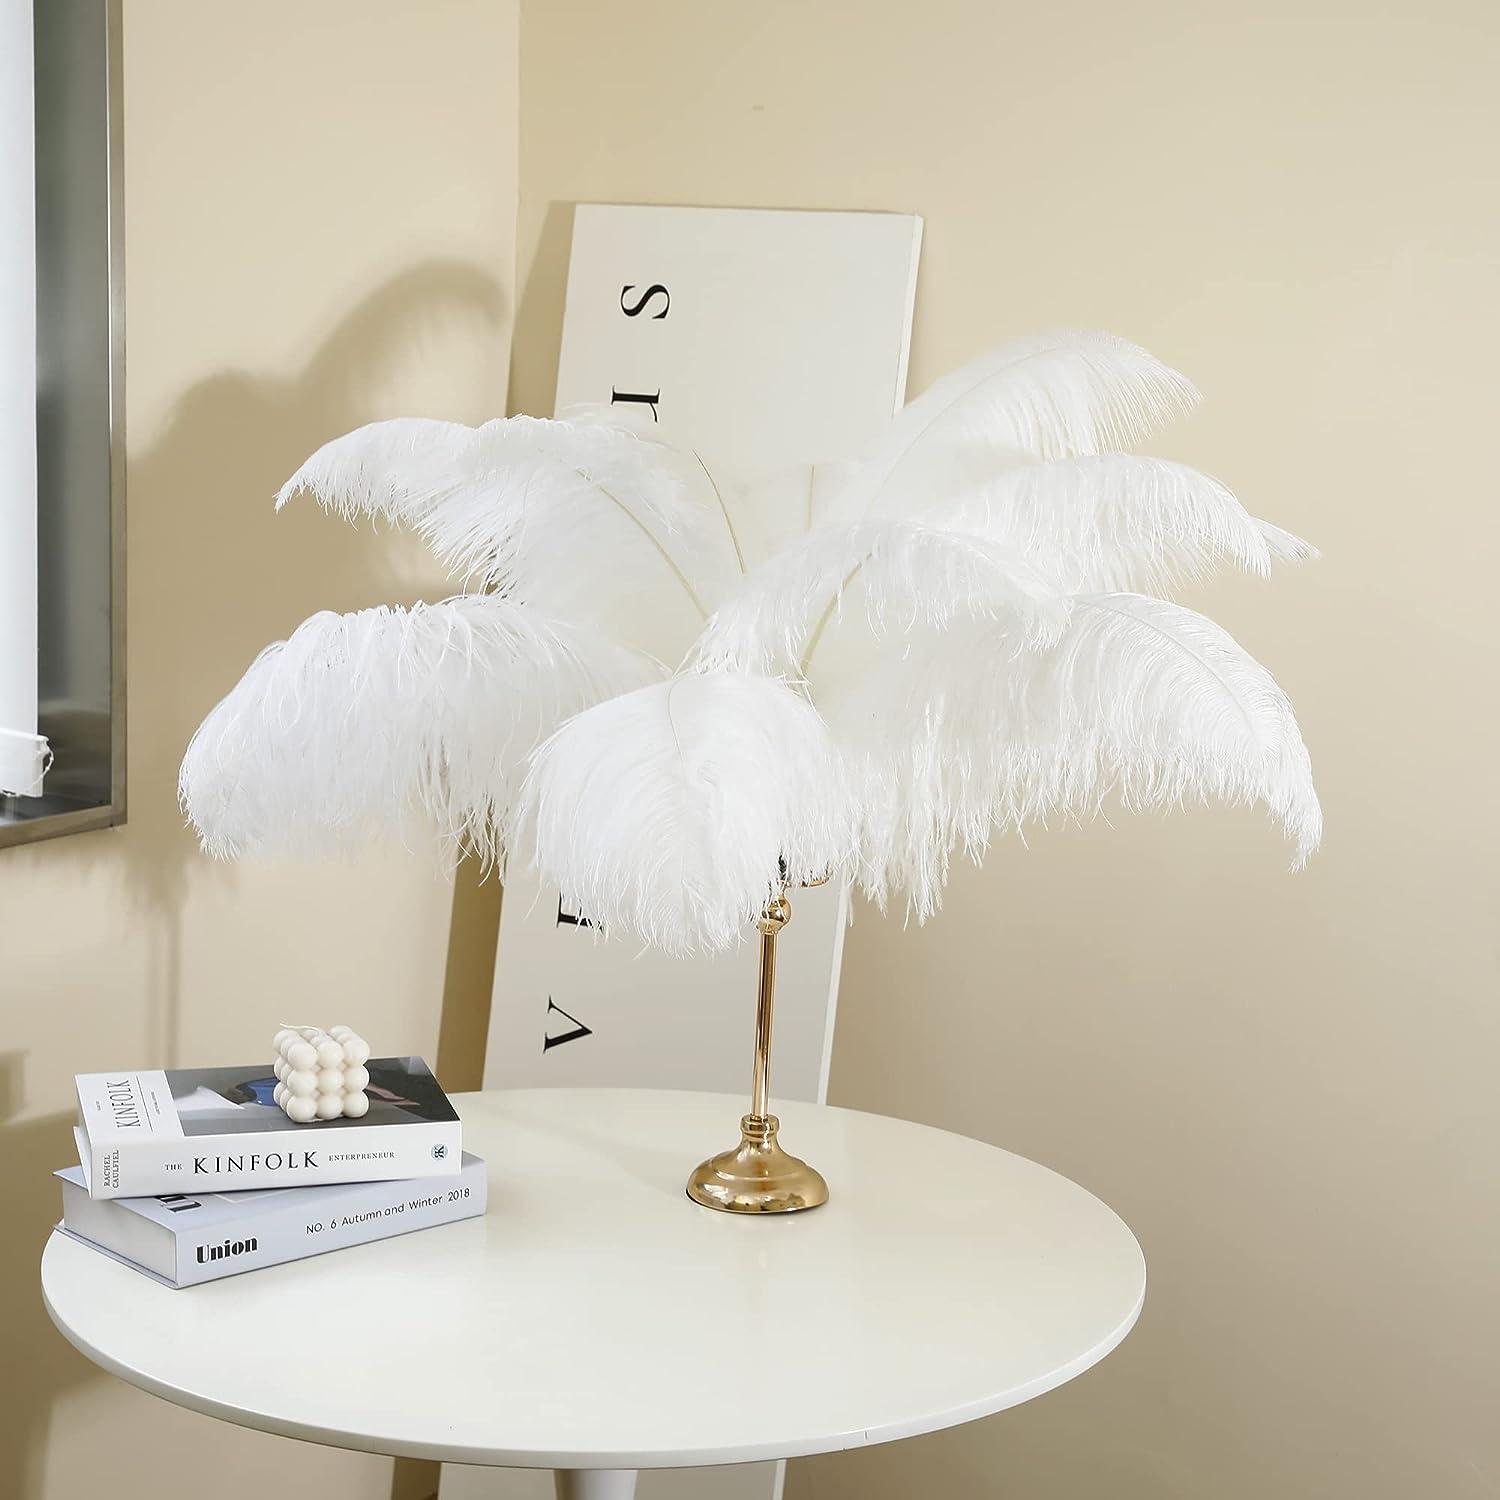 10PcsWhite Ostrich Feathers Wedding Centerpieces For Tables